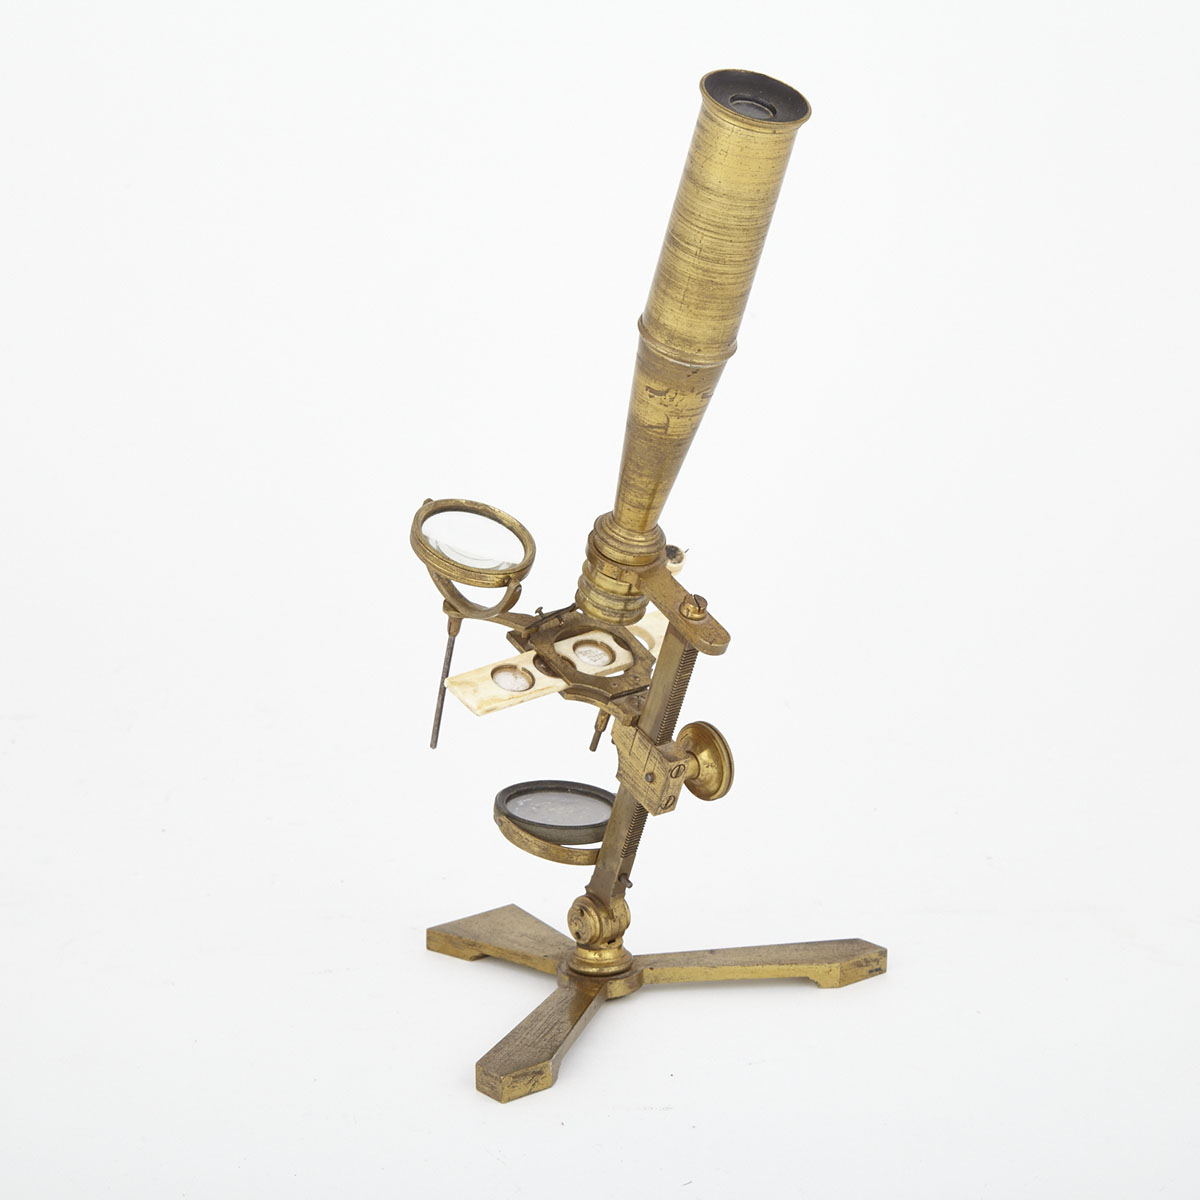 Jones’ Most Improved Type Monocular Compound Lacquered Brass Microscope, early 19th century